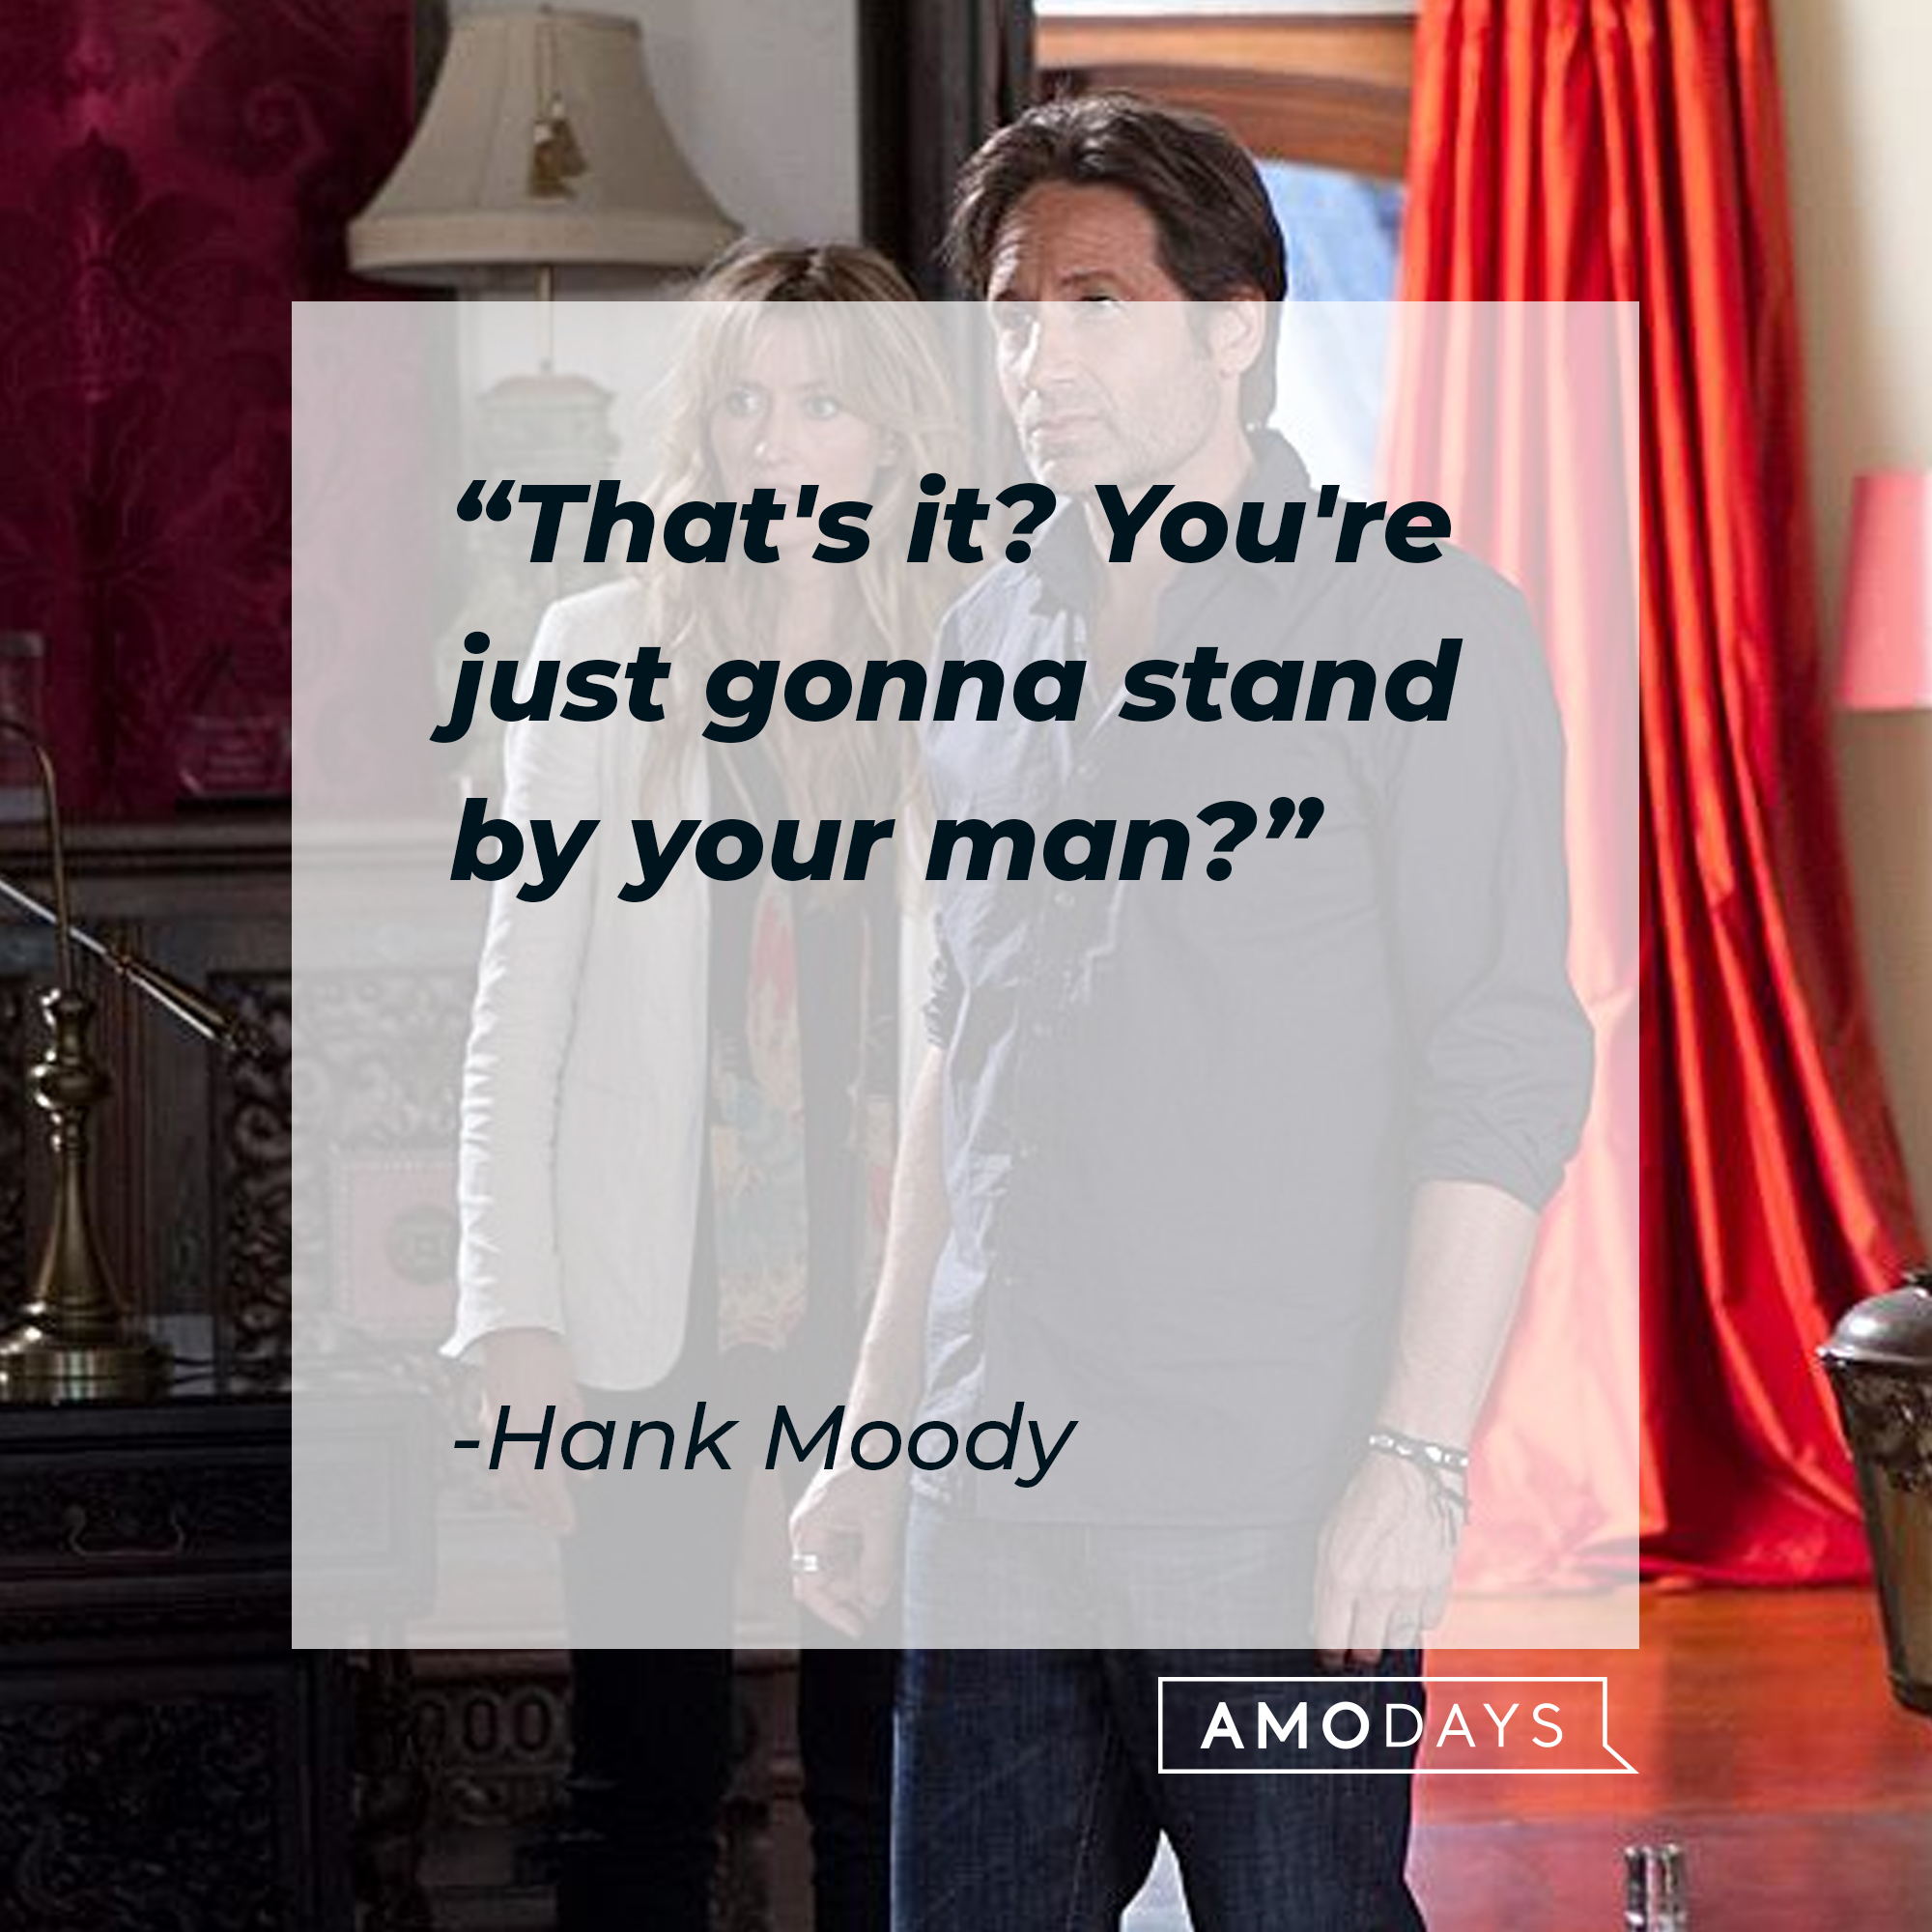 Hank Moody's quote: "That's it? You're just gonna stand by your man?" | Image: AmoDays